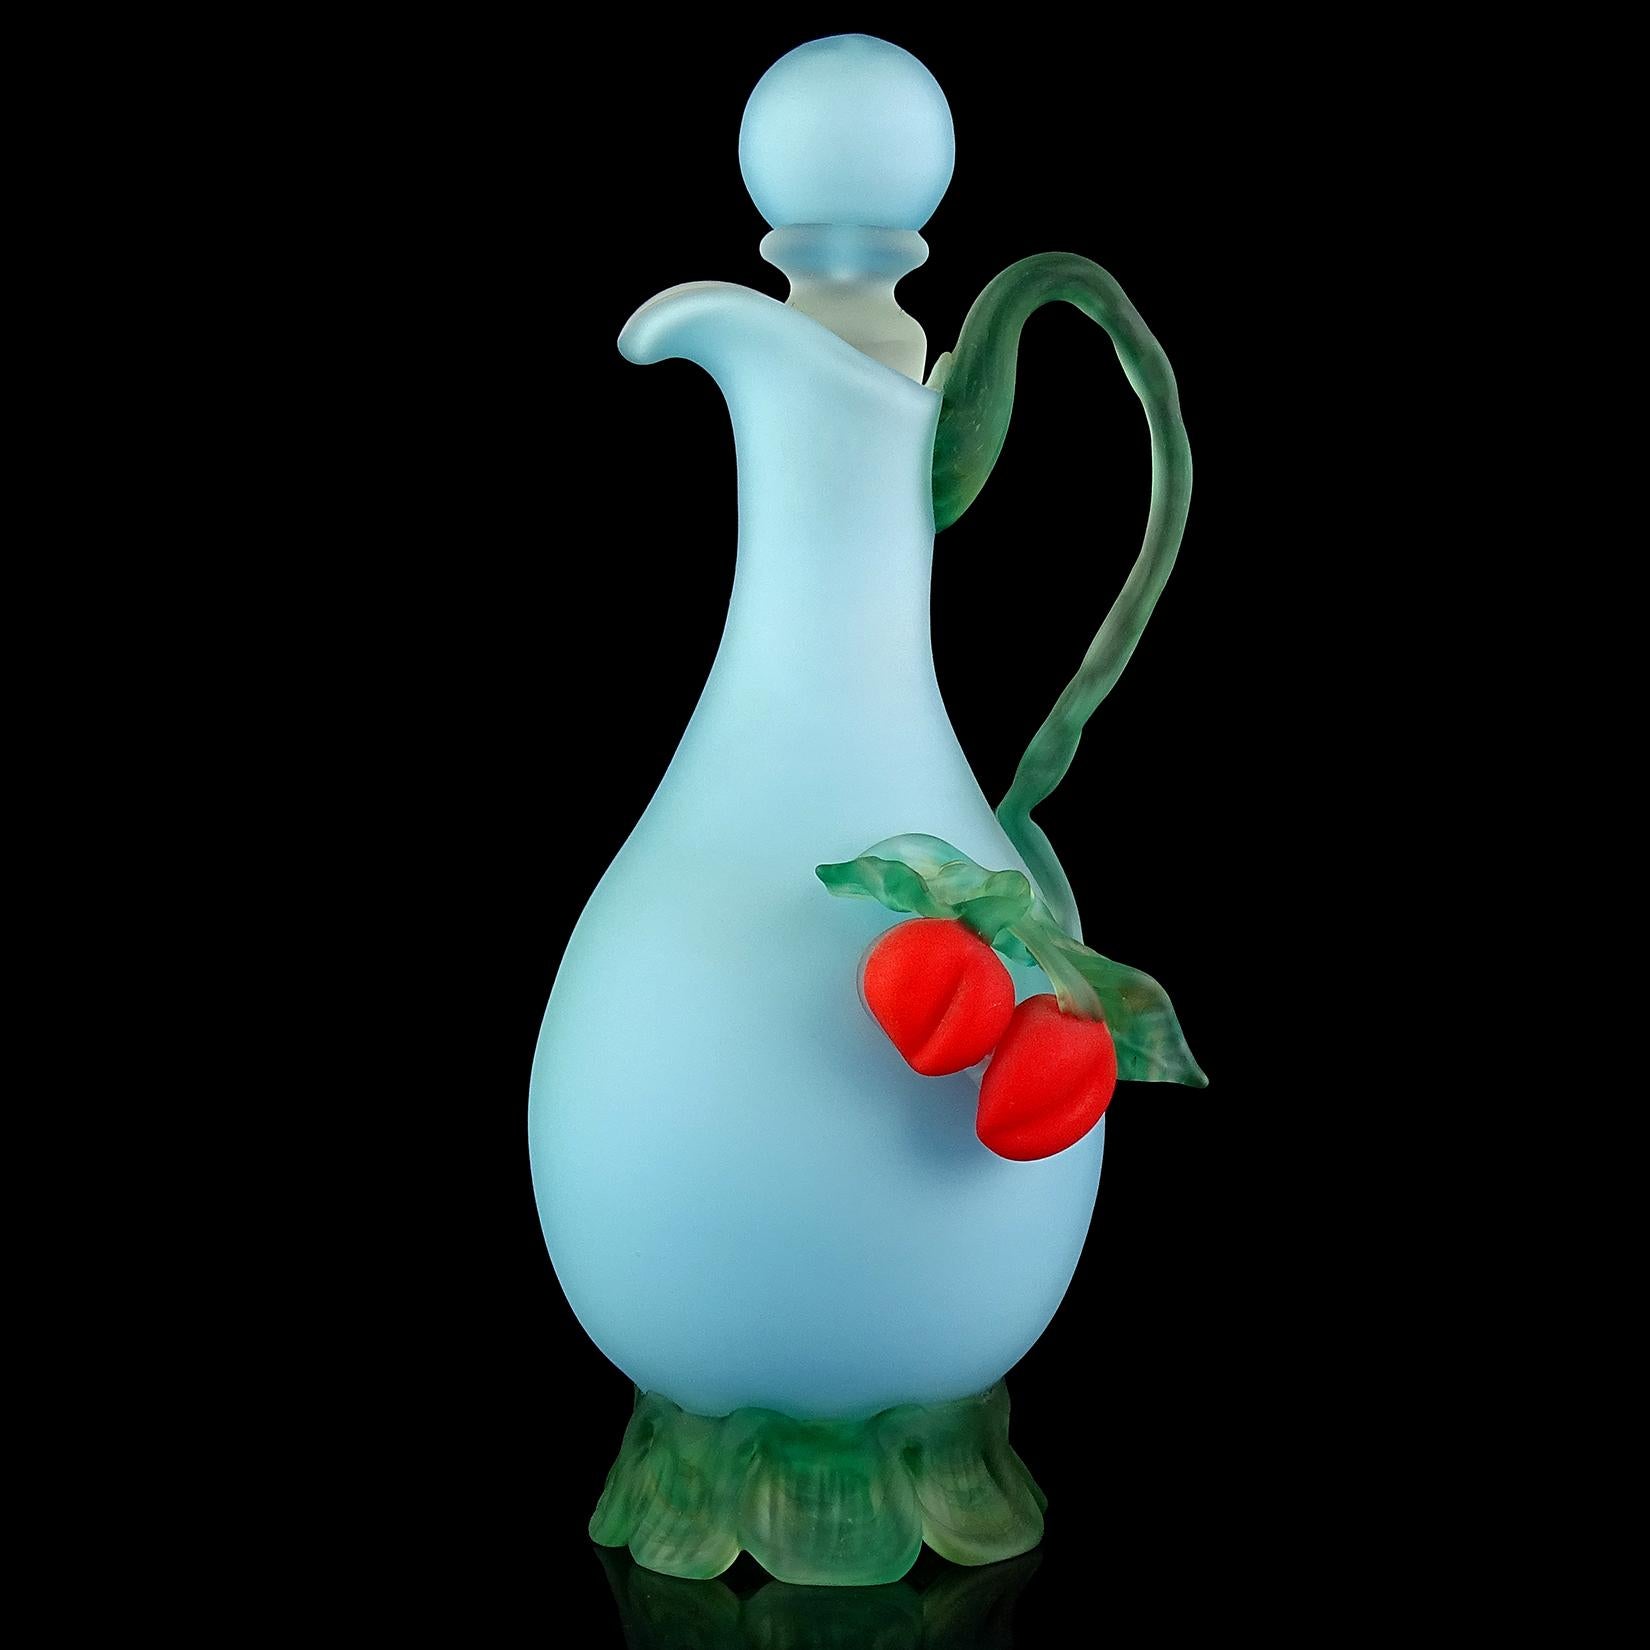 Beautiful Murano hand blown baby blue with applied red cherries Italian satin art glass pitcher / ewer. It has the original stopper, with mottled green vine handle, leafs and crimped base. The piece is circa 1960s-1970s, but created in the style of